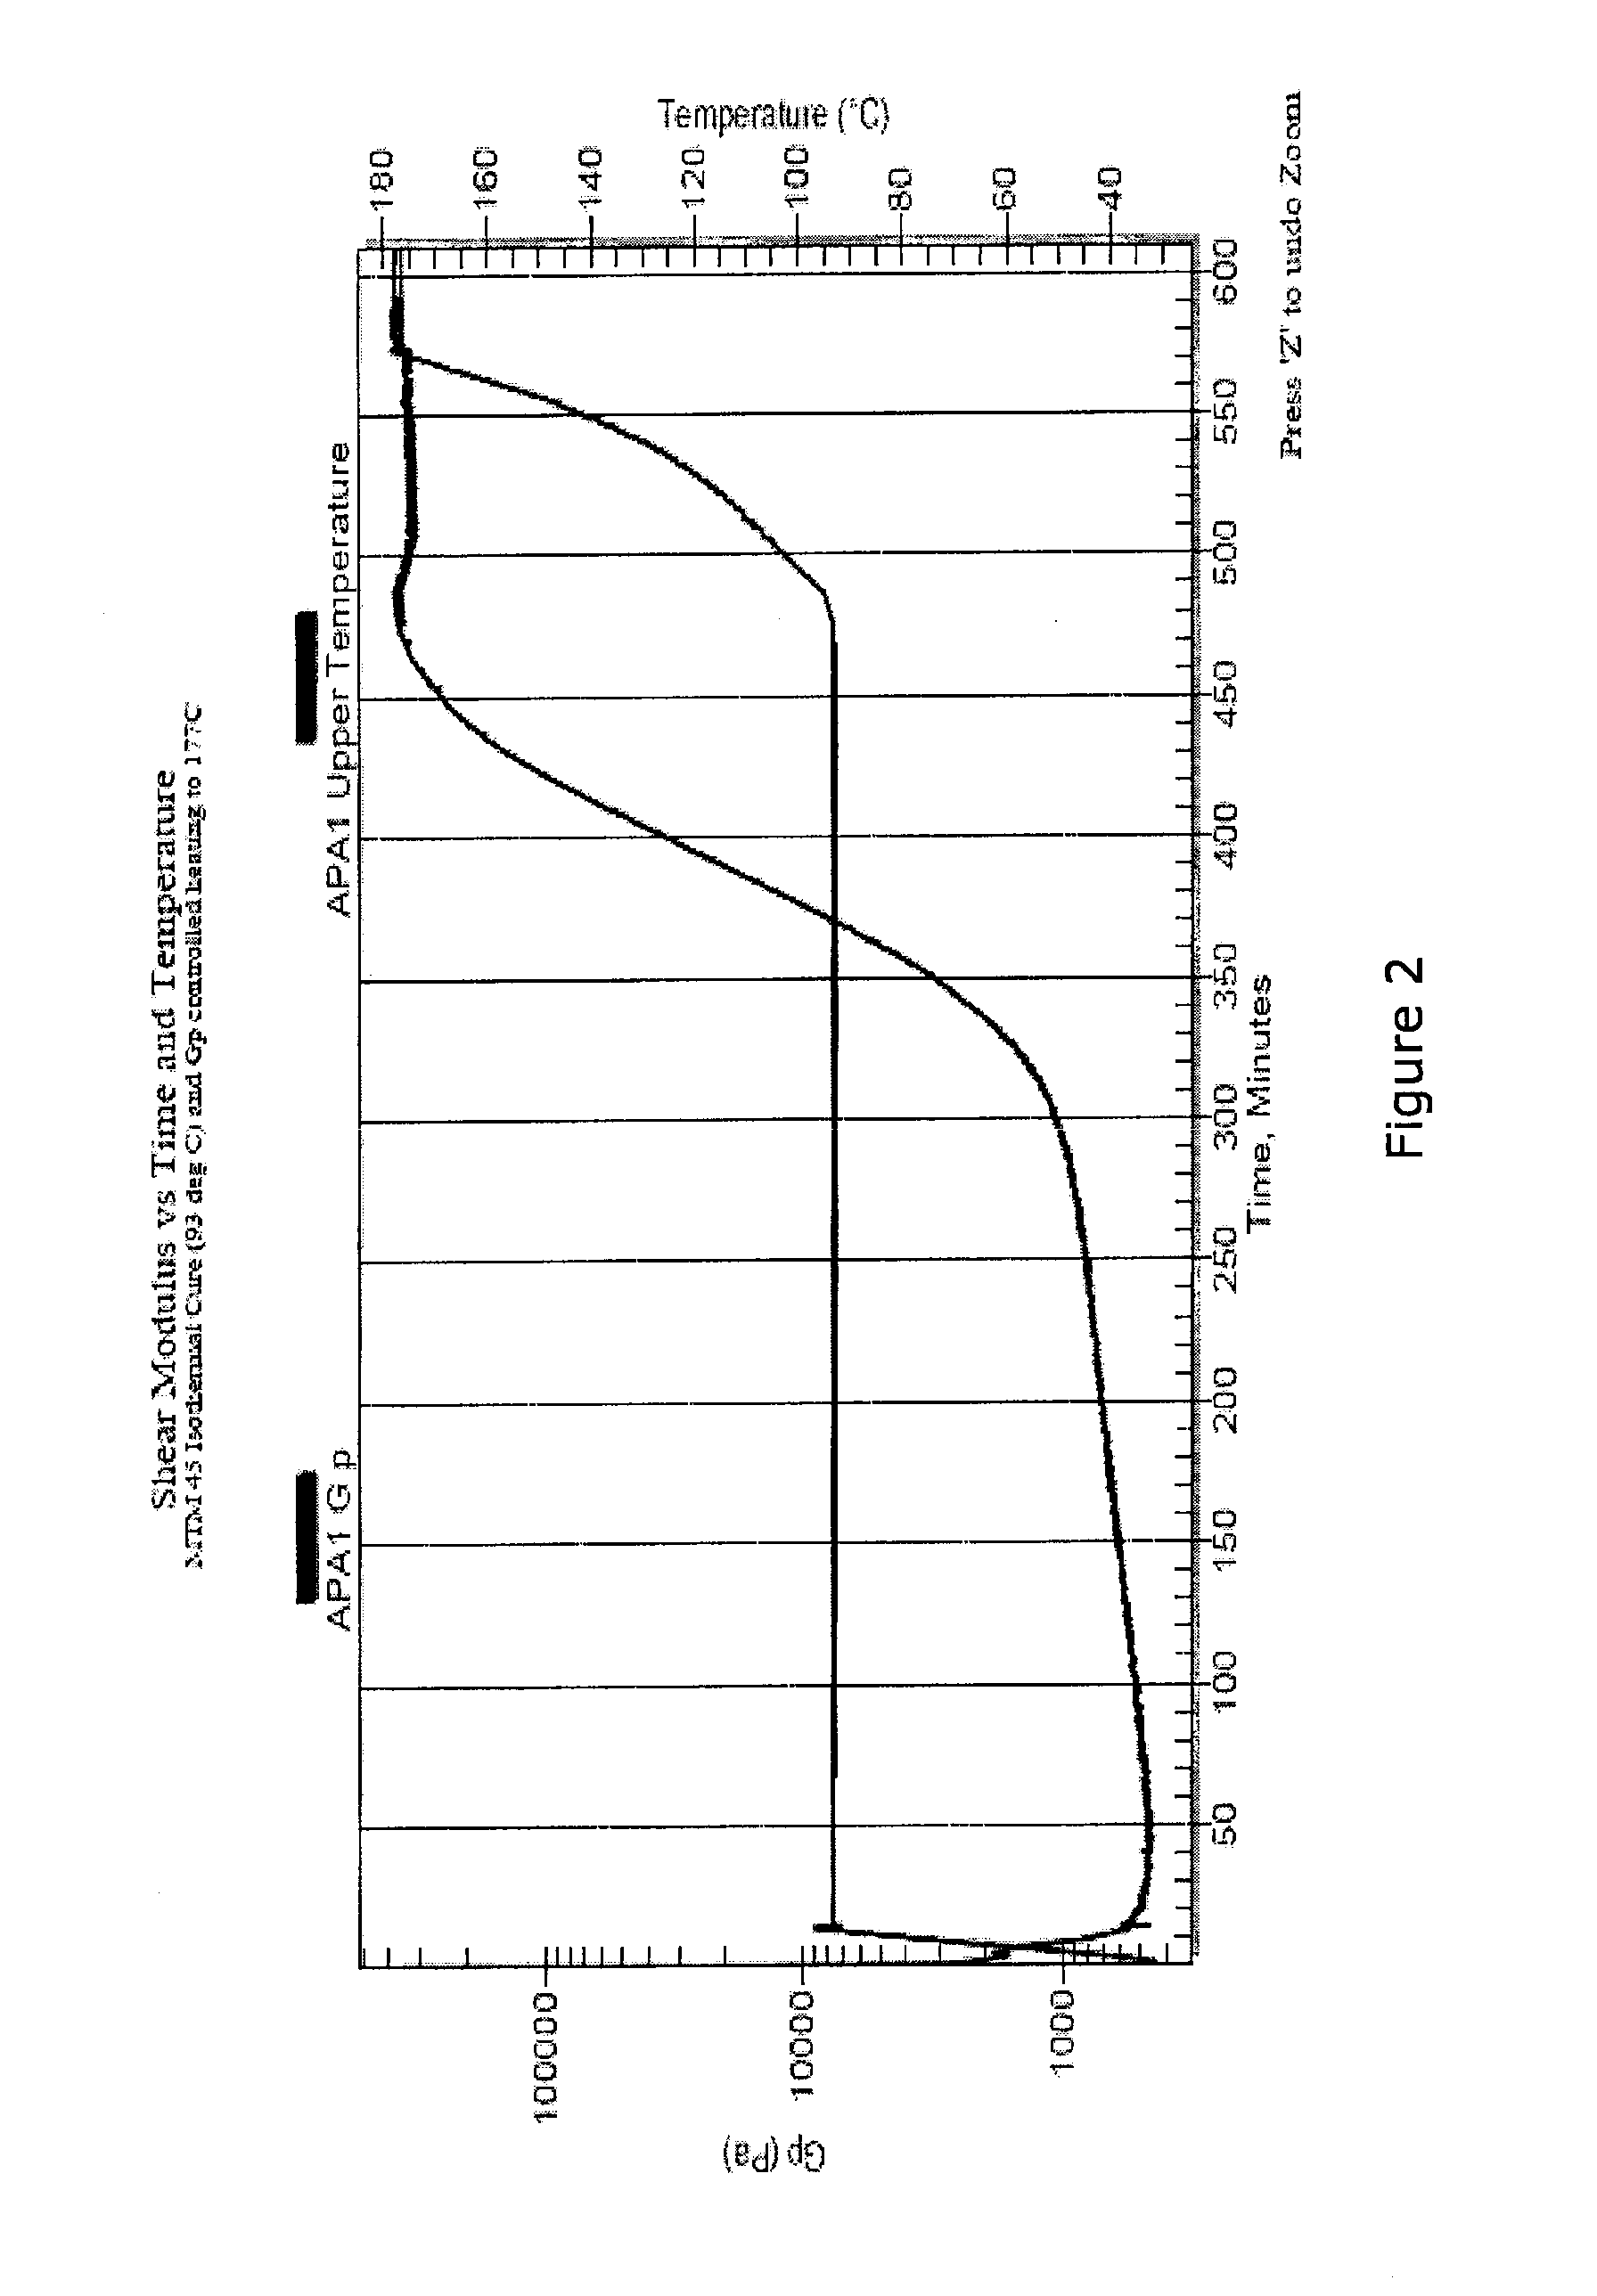 System and method for monitoring and controlling production of composite materials